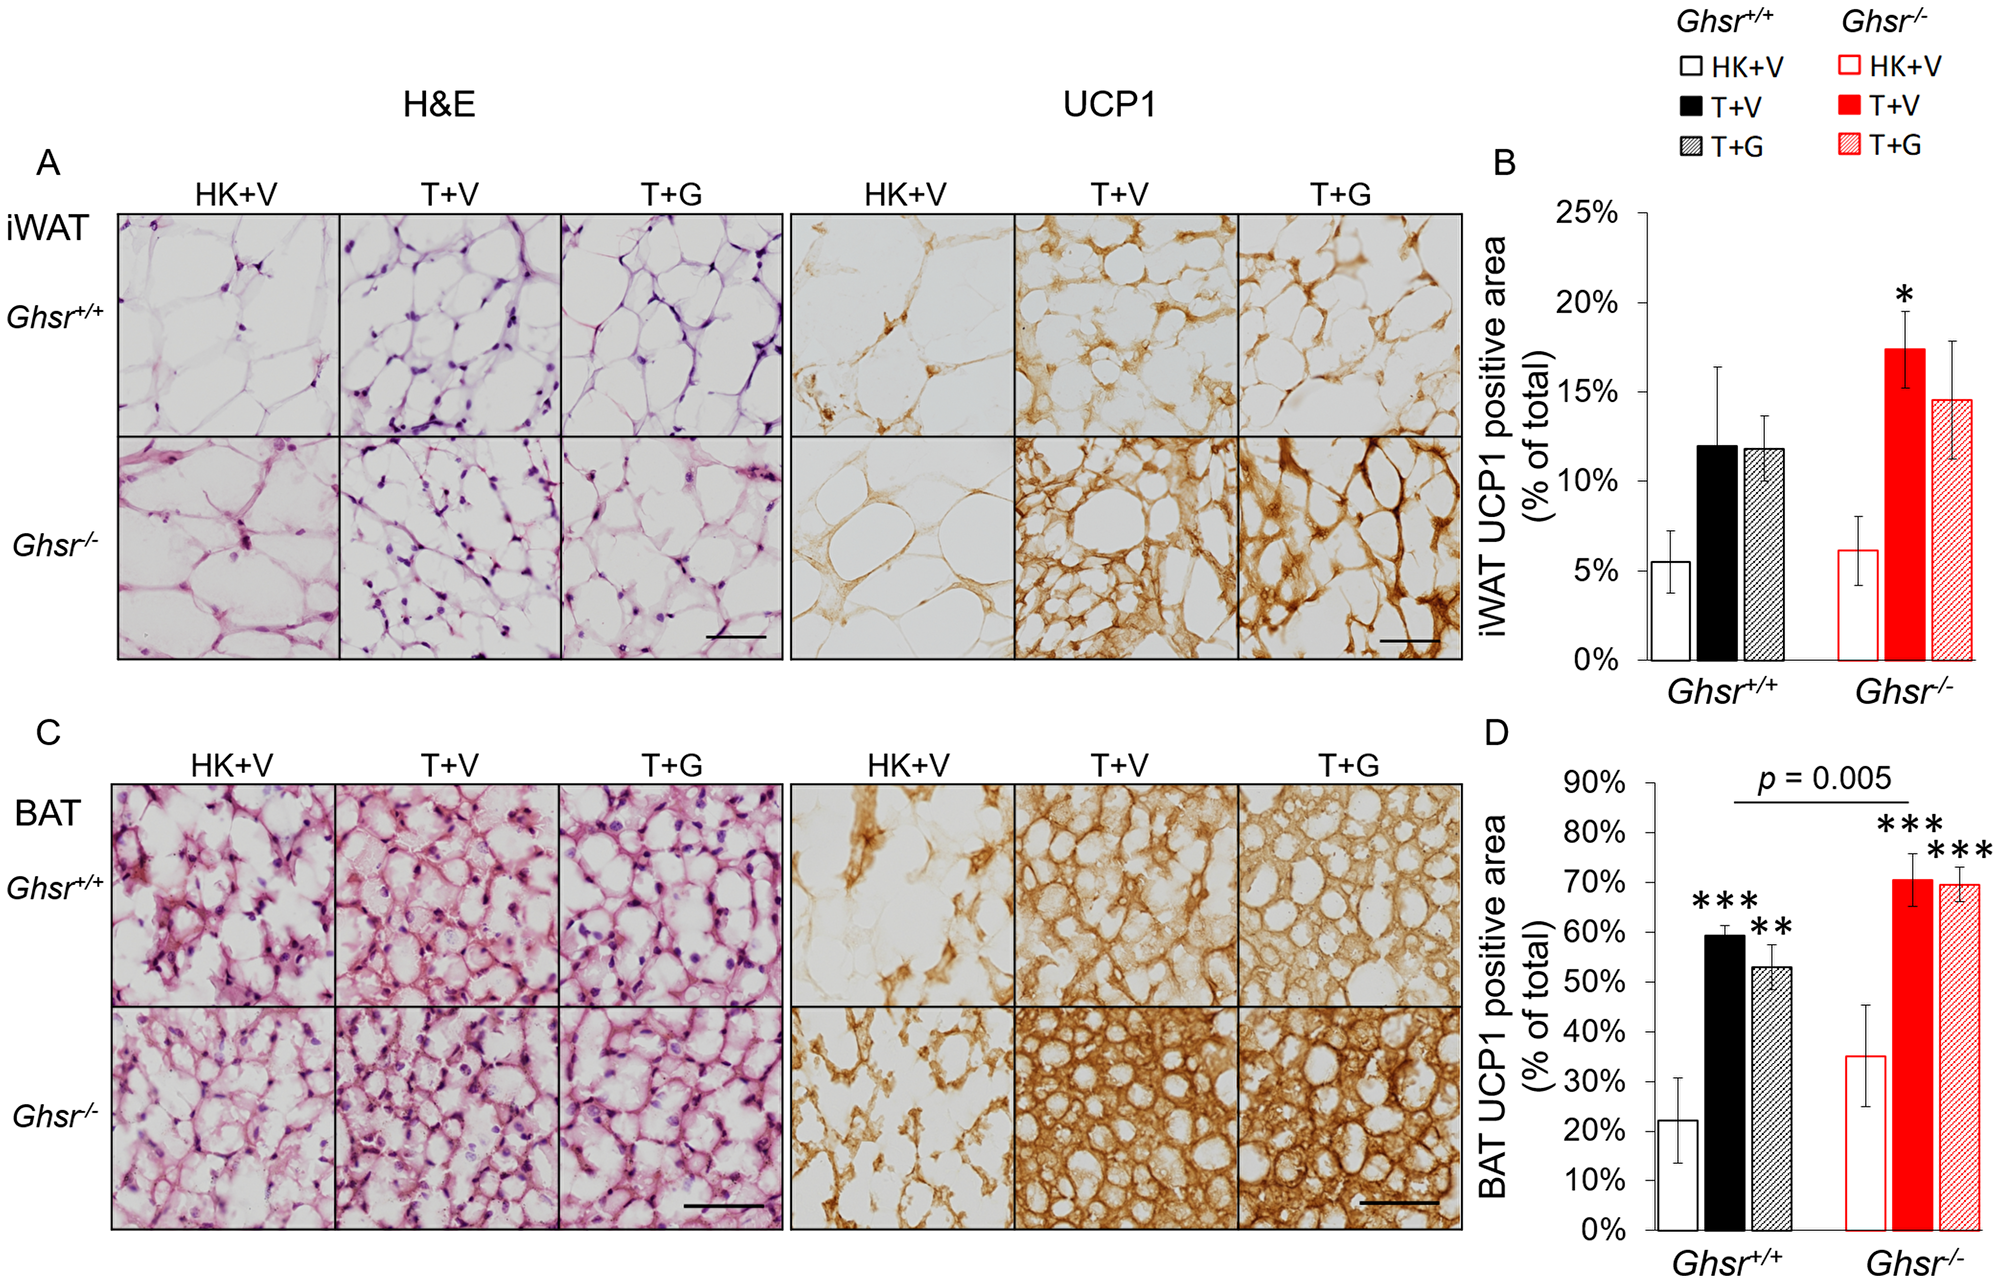 Expression of UCP-1 in iWAT and BAT.